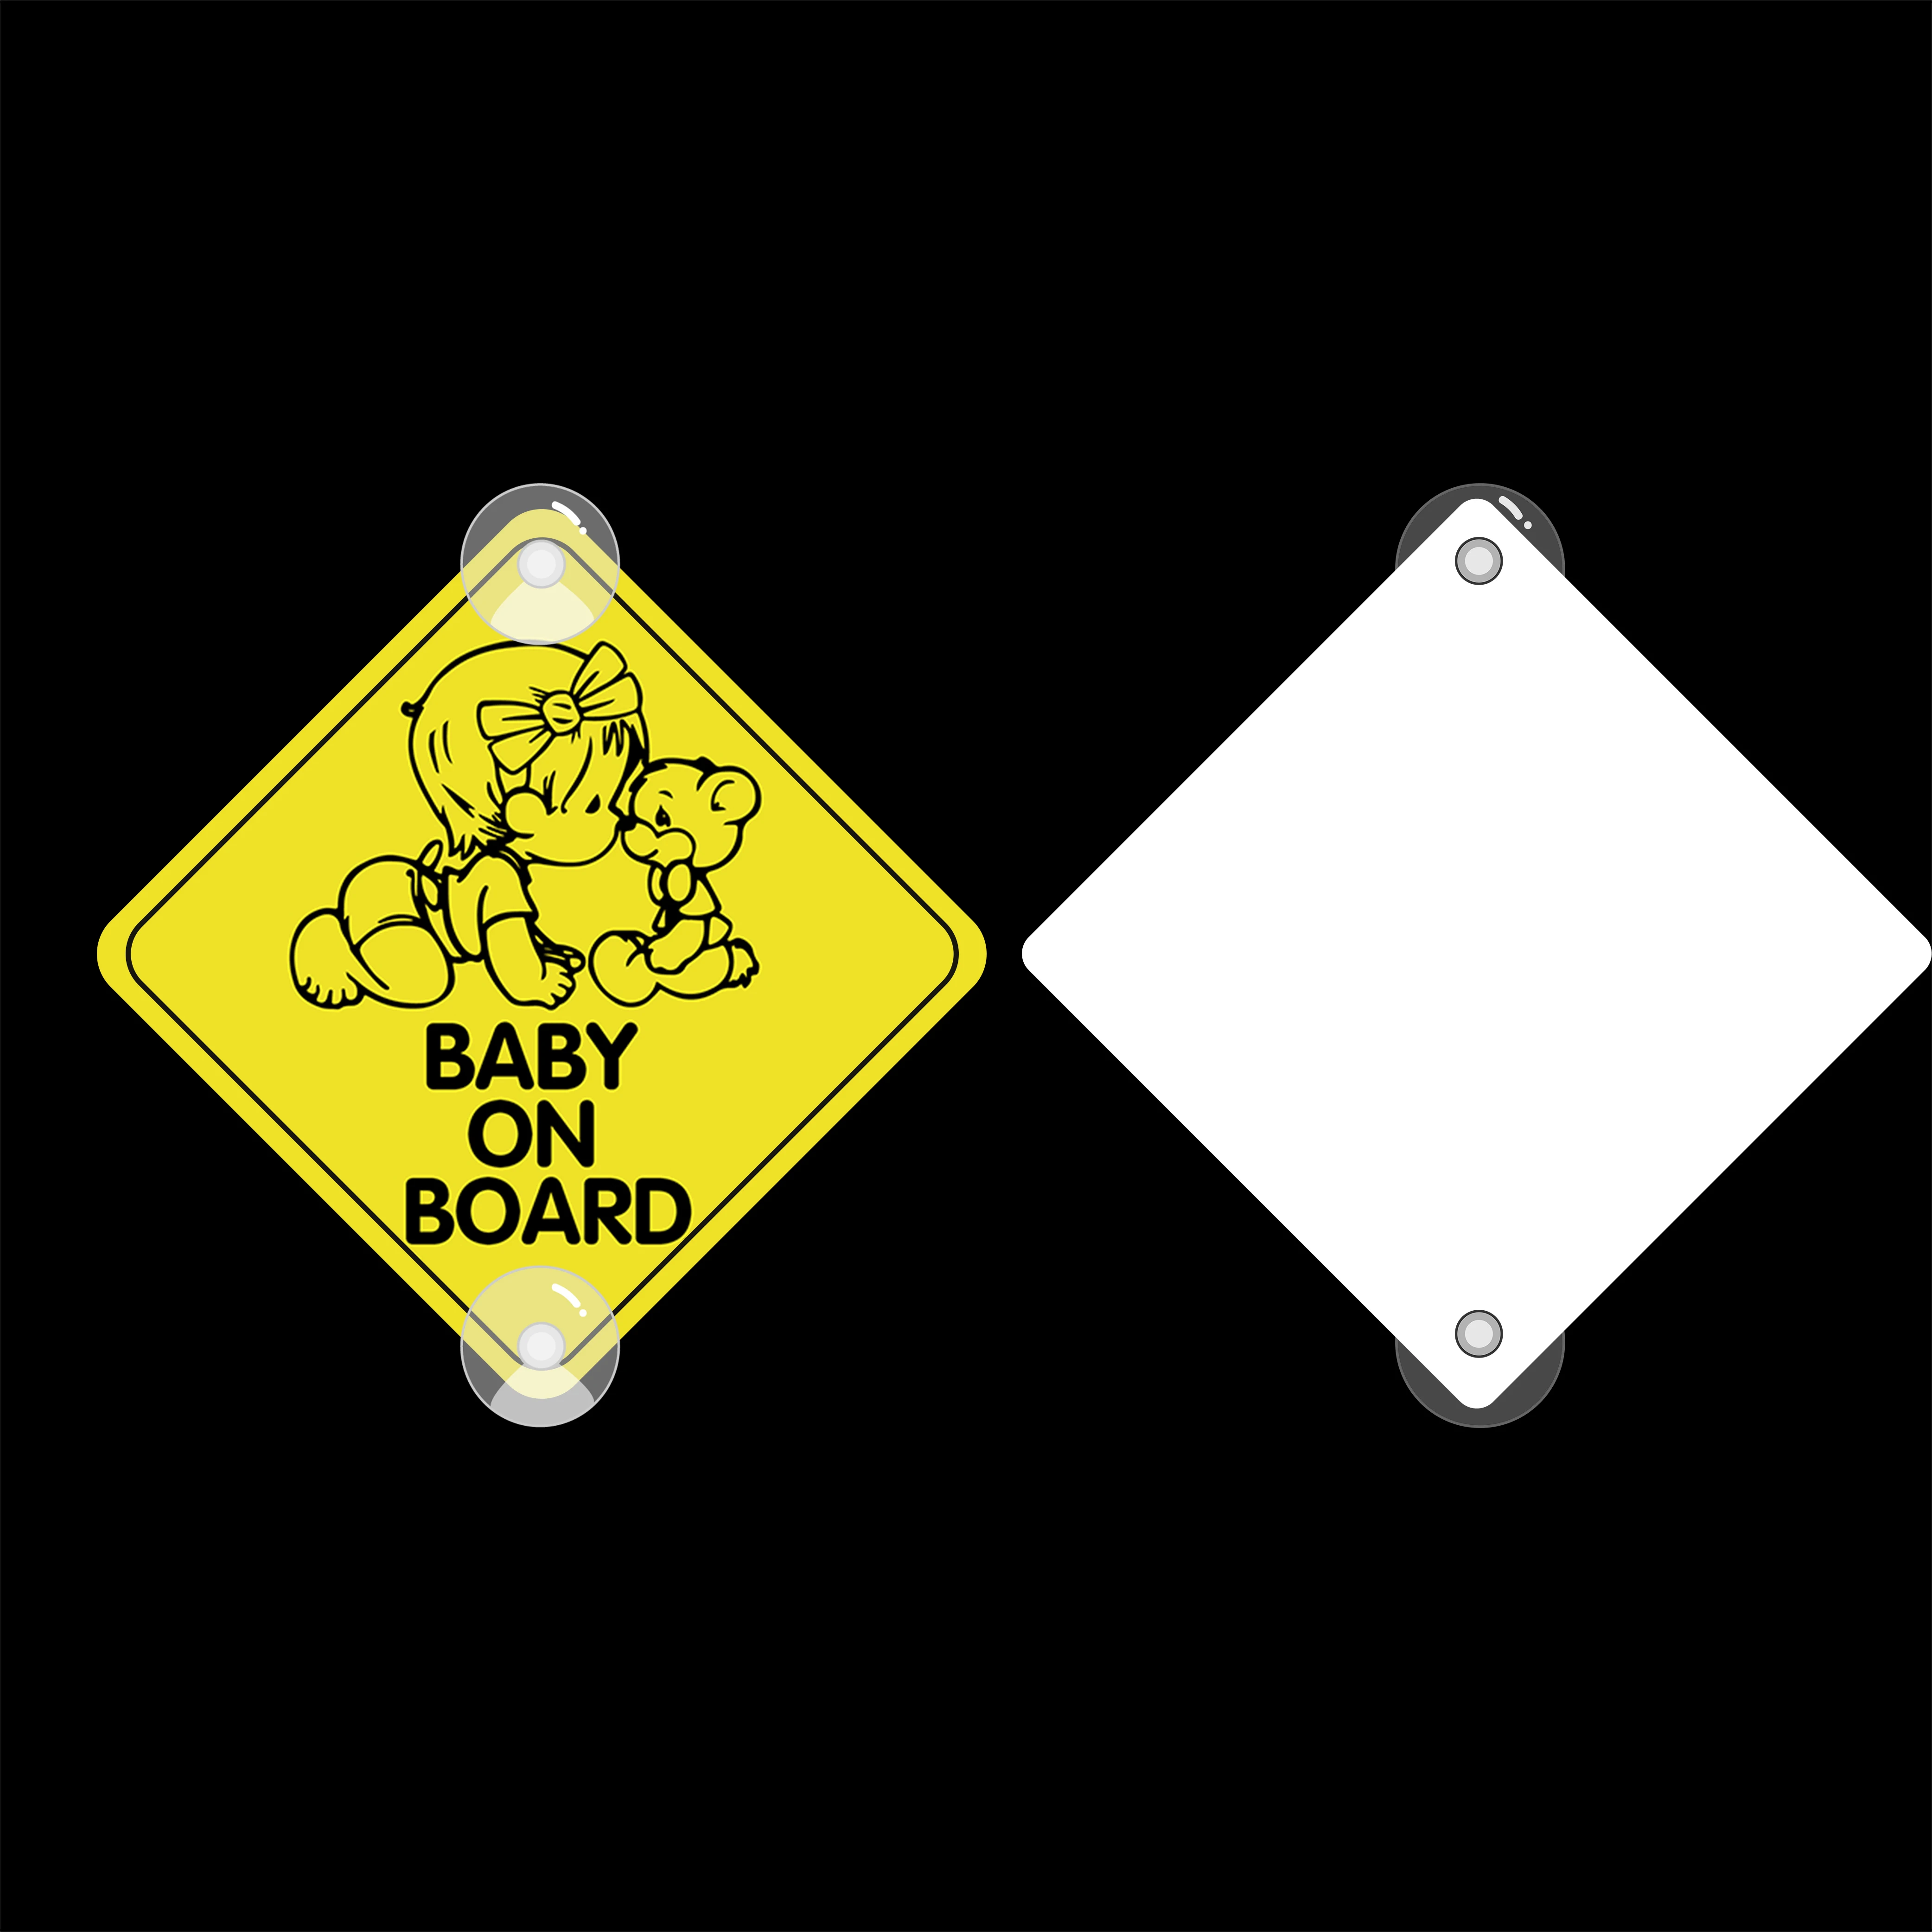 Baby On Board Sign